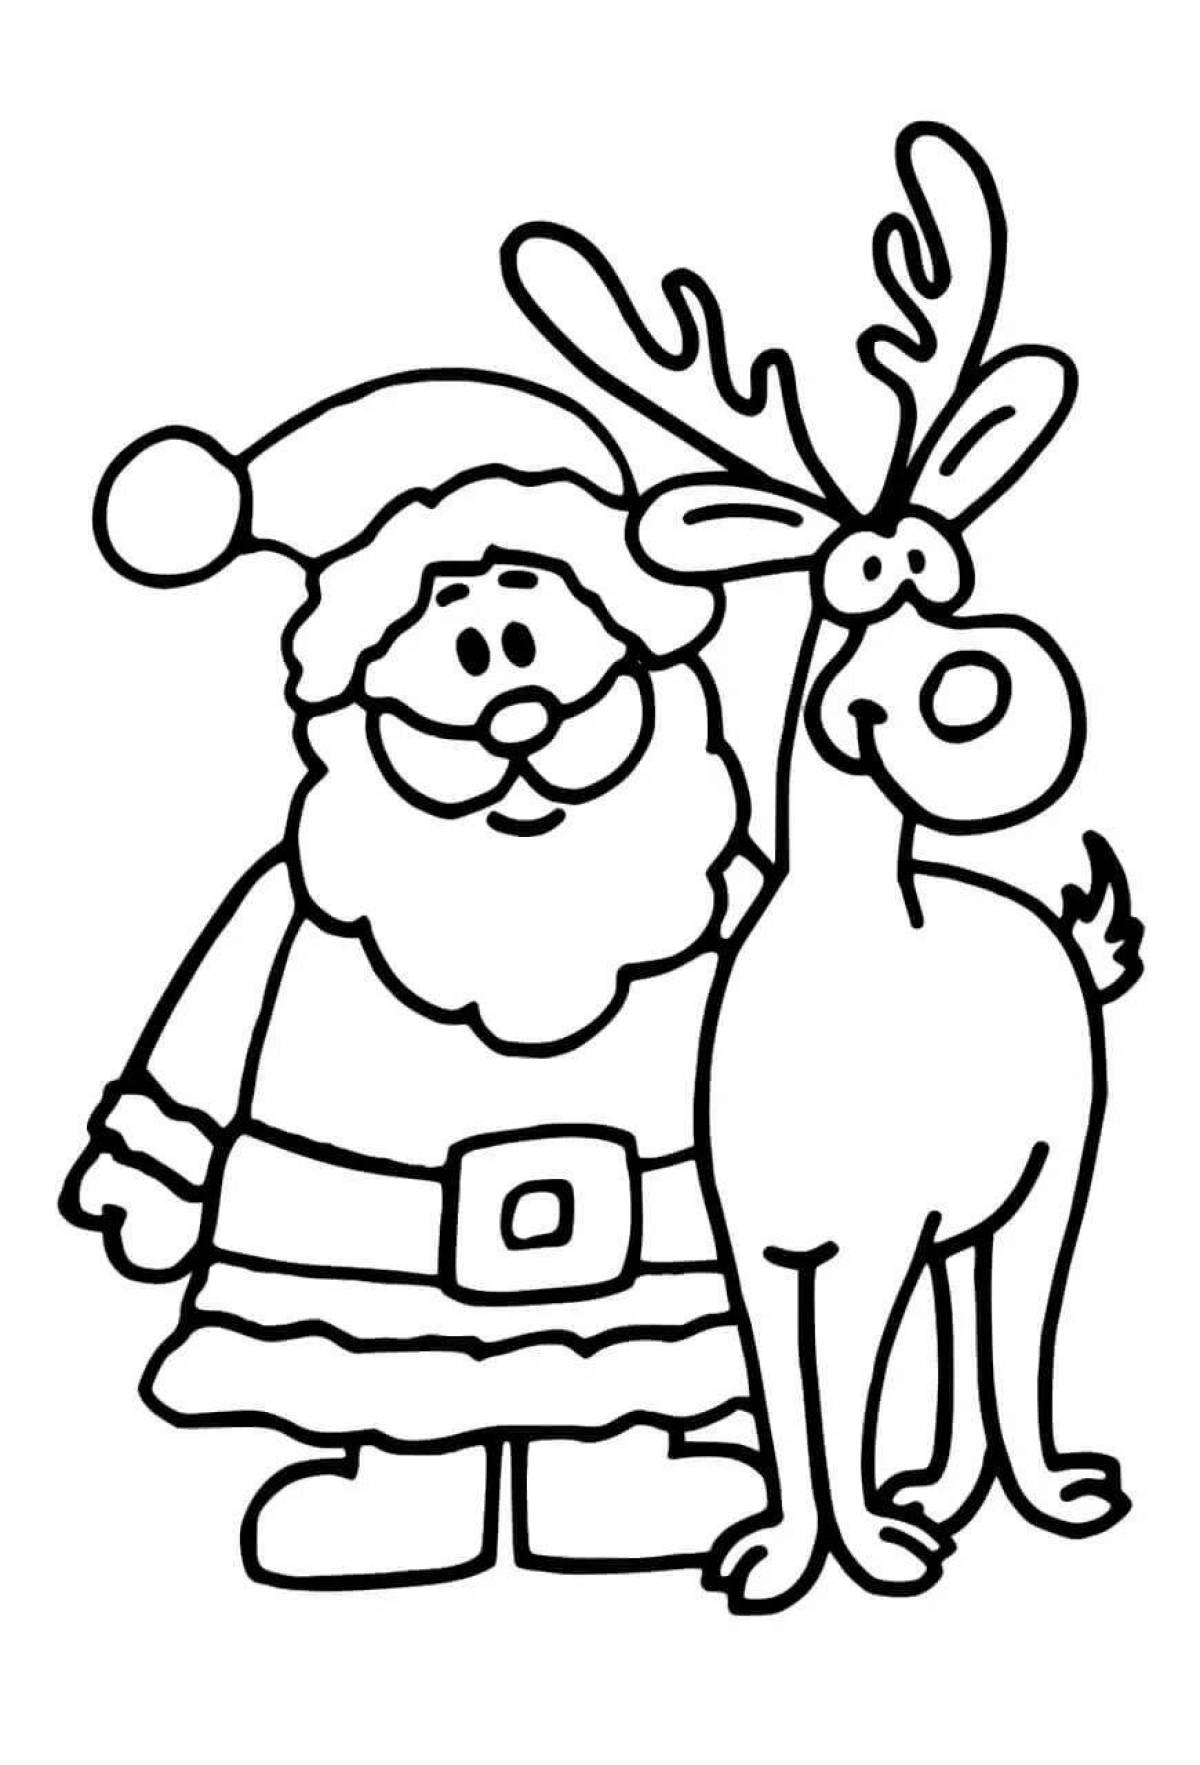 Coloring page cheerful santa claus and reindeer